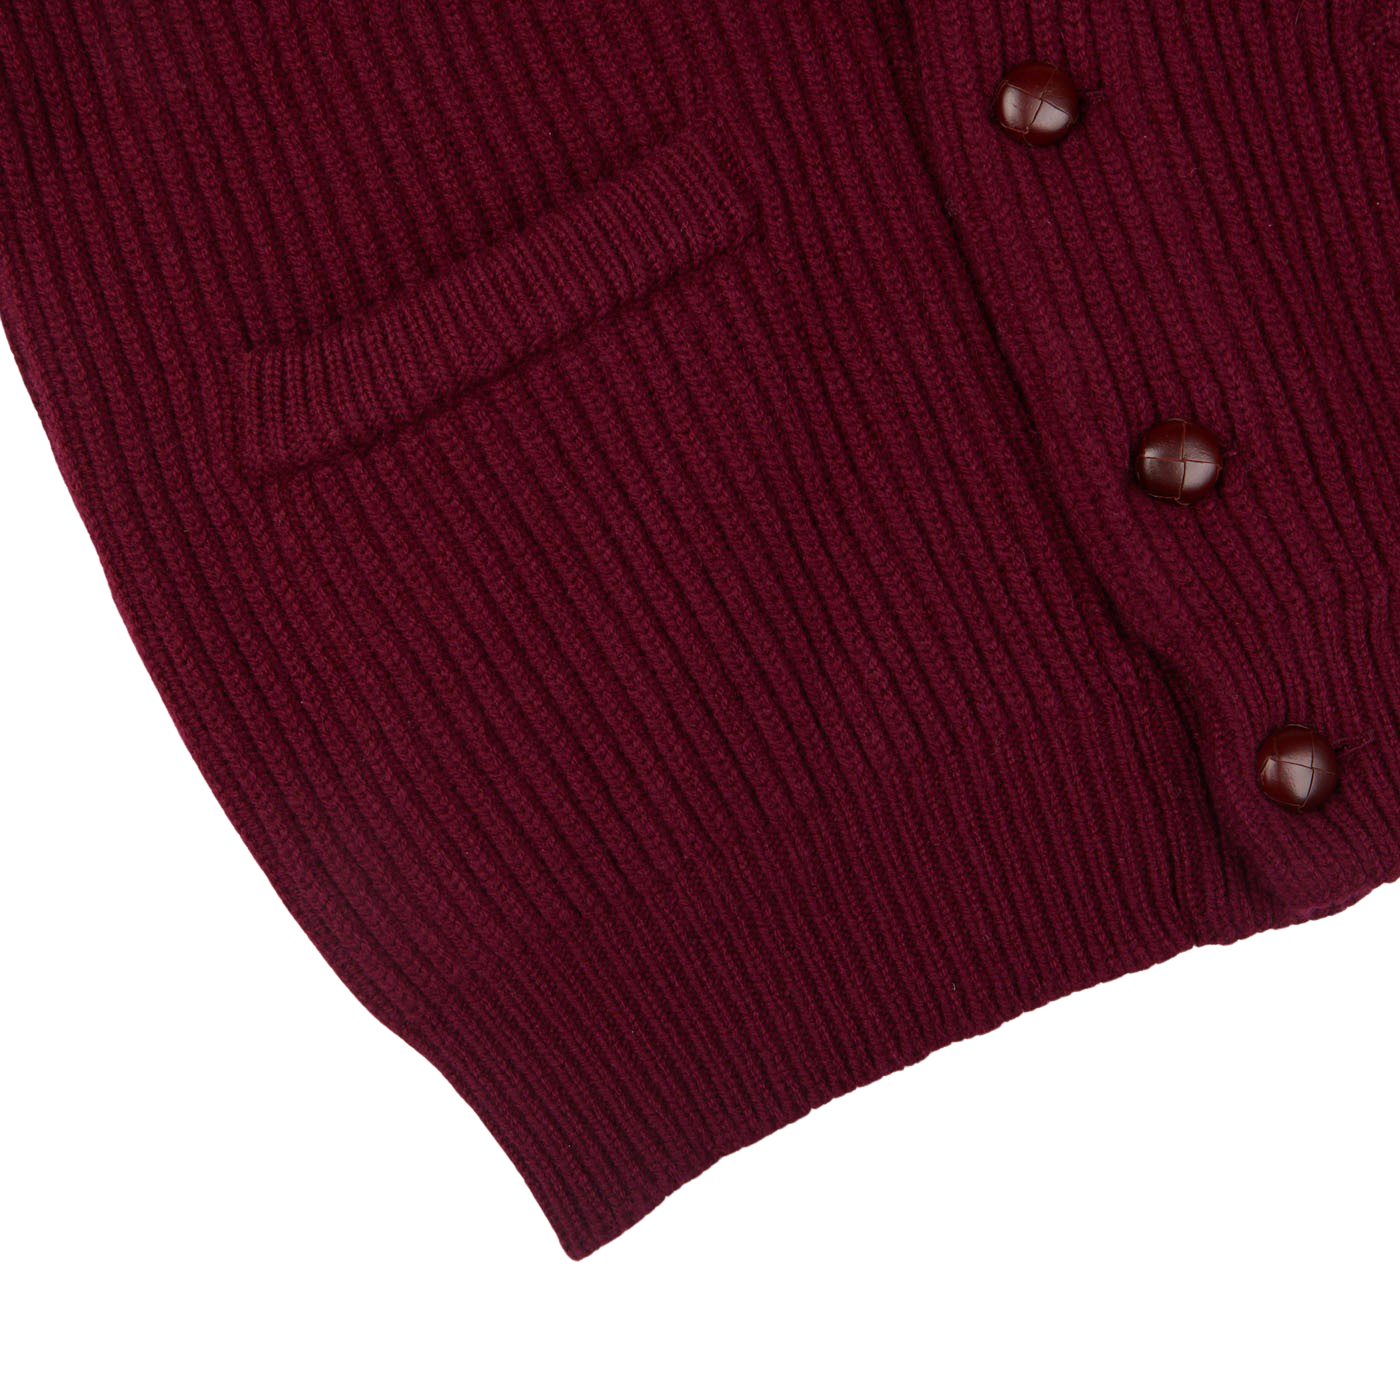 A William Lockie Bordeaux Lambswool Shawl Collar Cardigan with buttons.